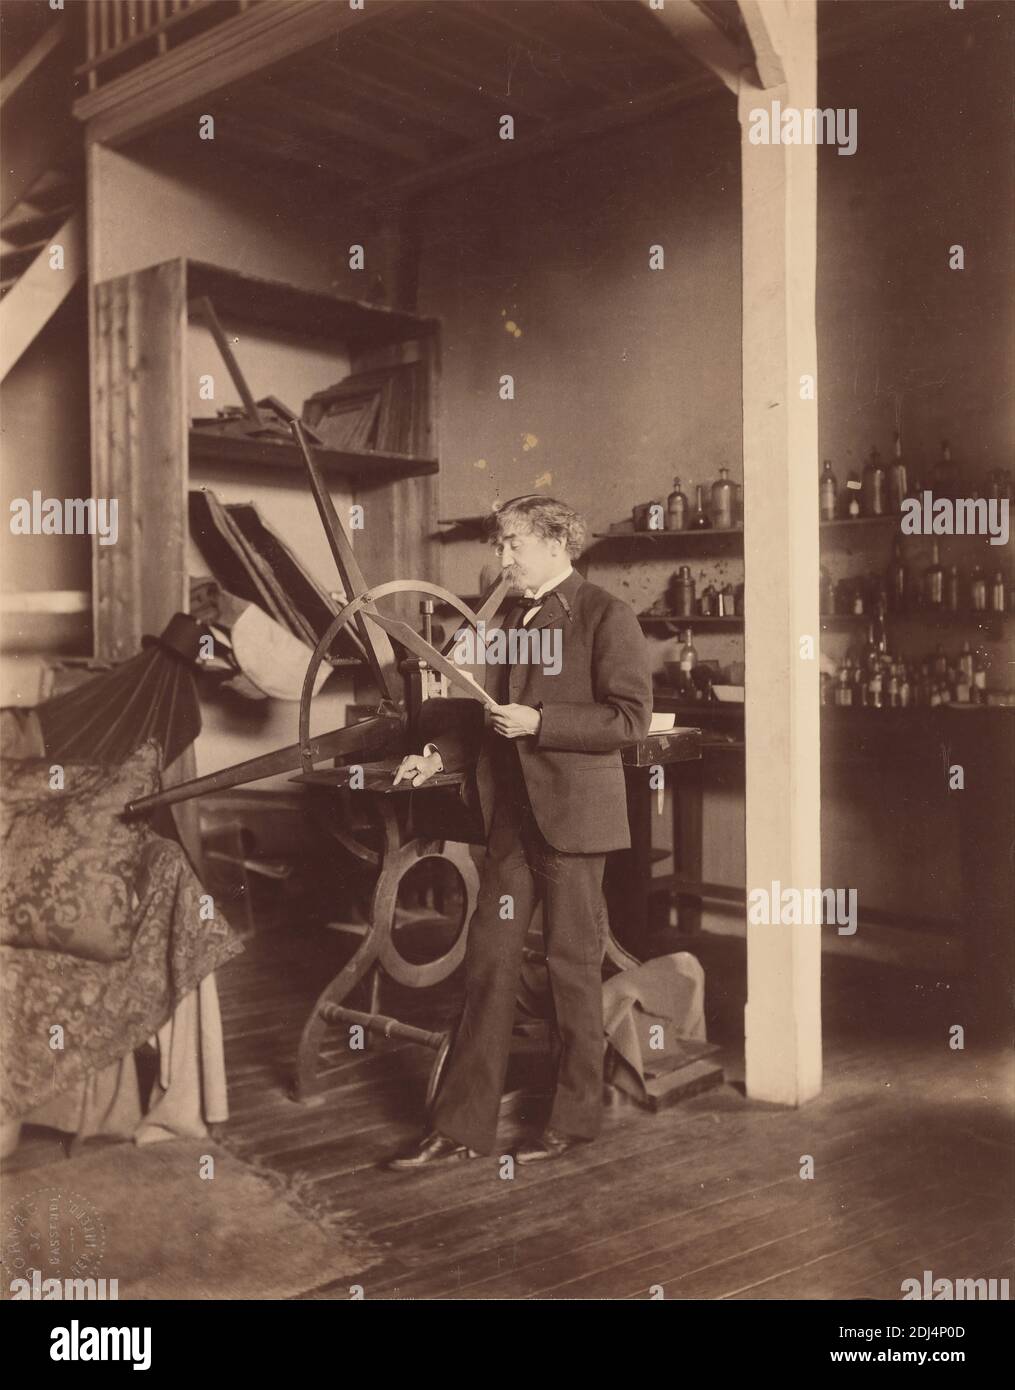 Whistler Standing at a Press in His Paris (rue Notre-Dame-des-Champs) Studio, Paul François Arnold Cardon, called 'Dornac', 1859–1941, French, 1893, Albumen print, Sheet: 10 1/4 x 8 inches (26 x 20.3 cm), artist, beam (structural element), blankets, bookcase, bottles, coat, collar, floorboards, man, painter, paper, pillow, portrait, printing press, printmaker, rafters, railing, rug, stairs, studio (work space), tie, top hat, trousers, vest, Europe, France, Paris Stock Photo